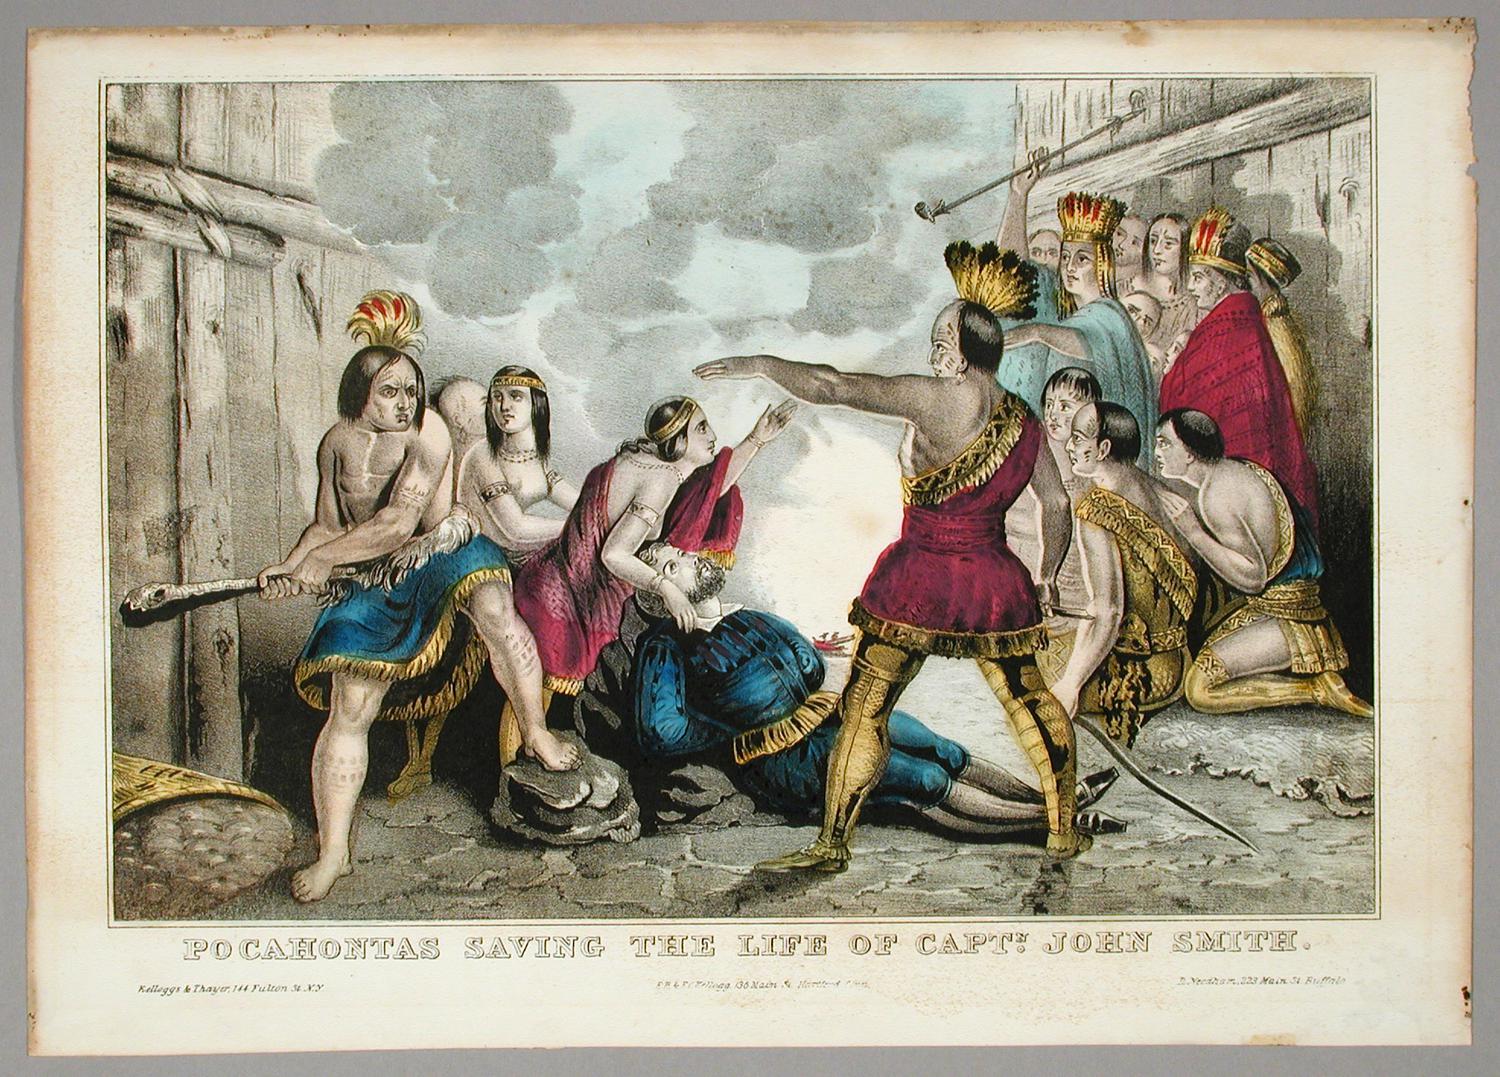 Captain John Smith is Saved by Pocahontas, 1608